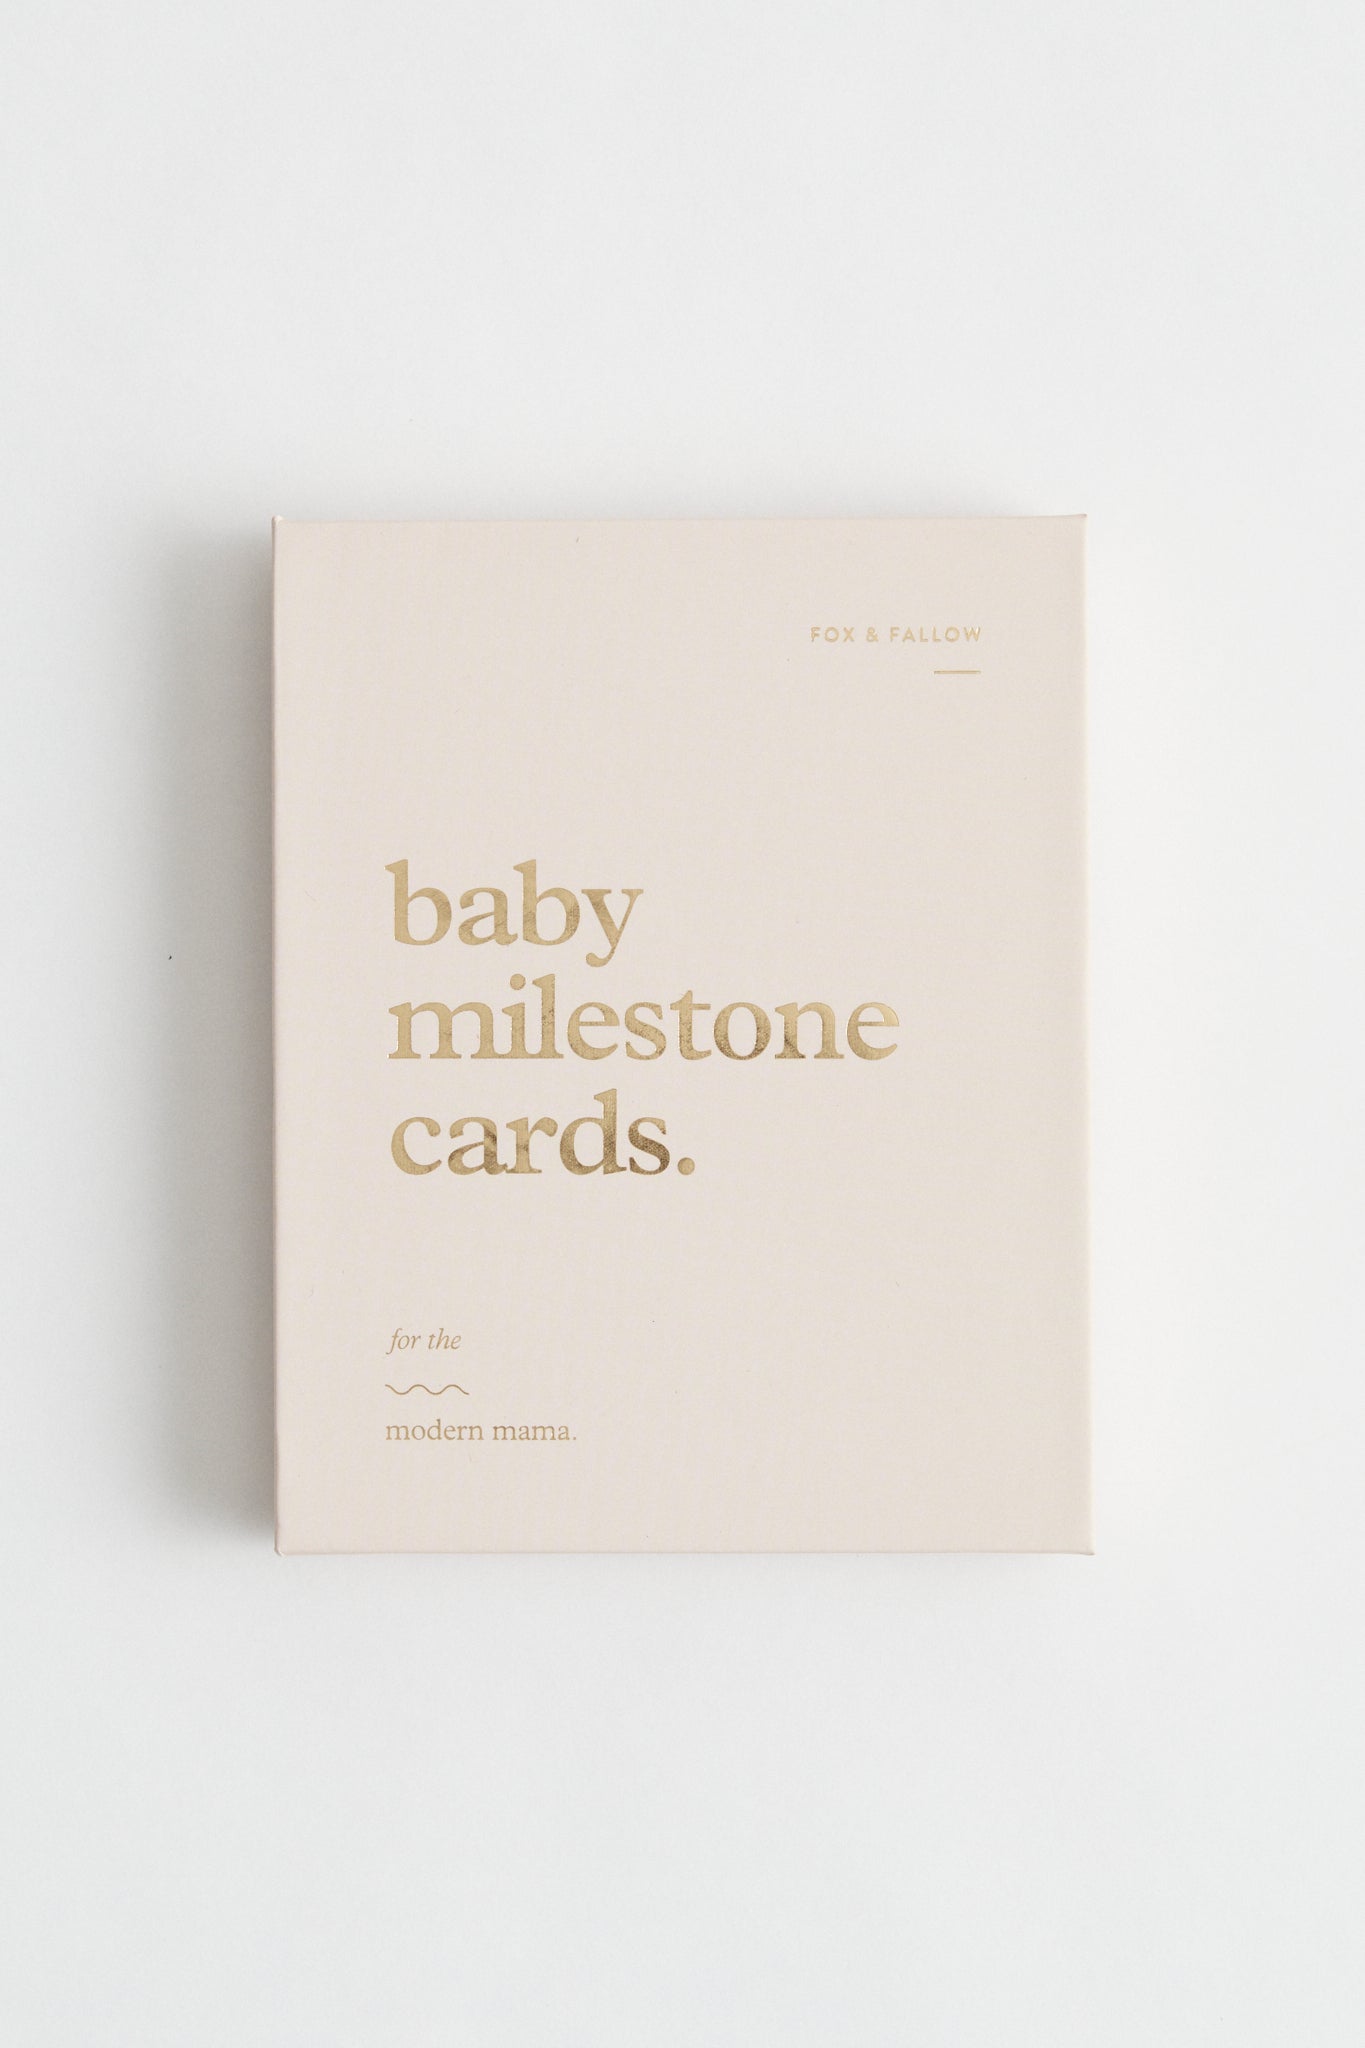 Baby Milestone cards in cream, with gold foil stamping. Packaged in keepsake box.